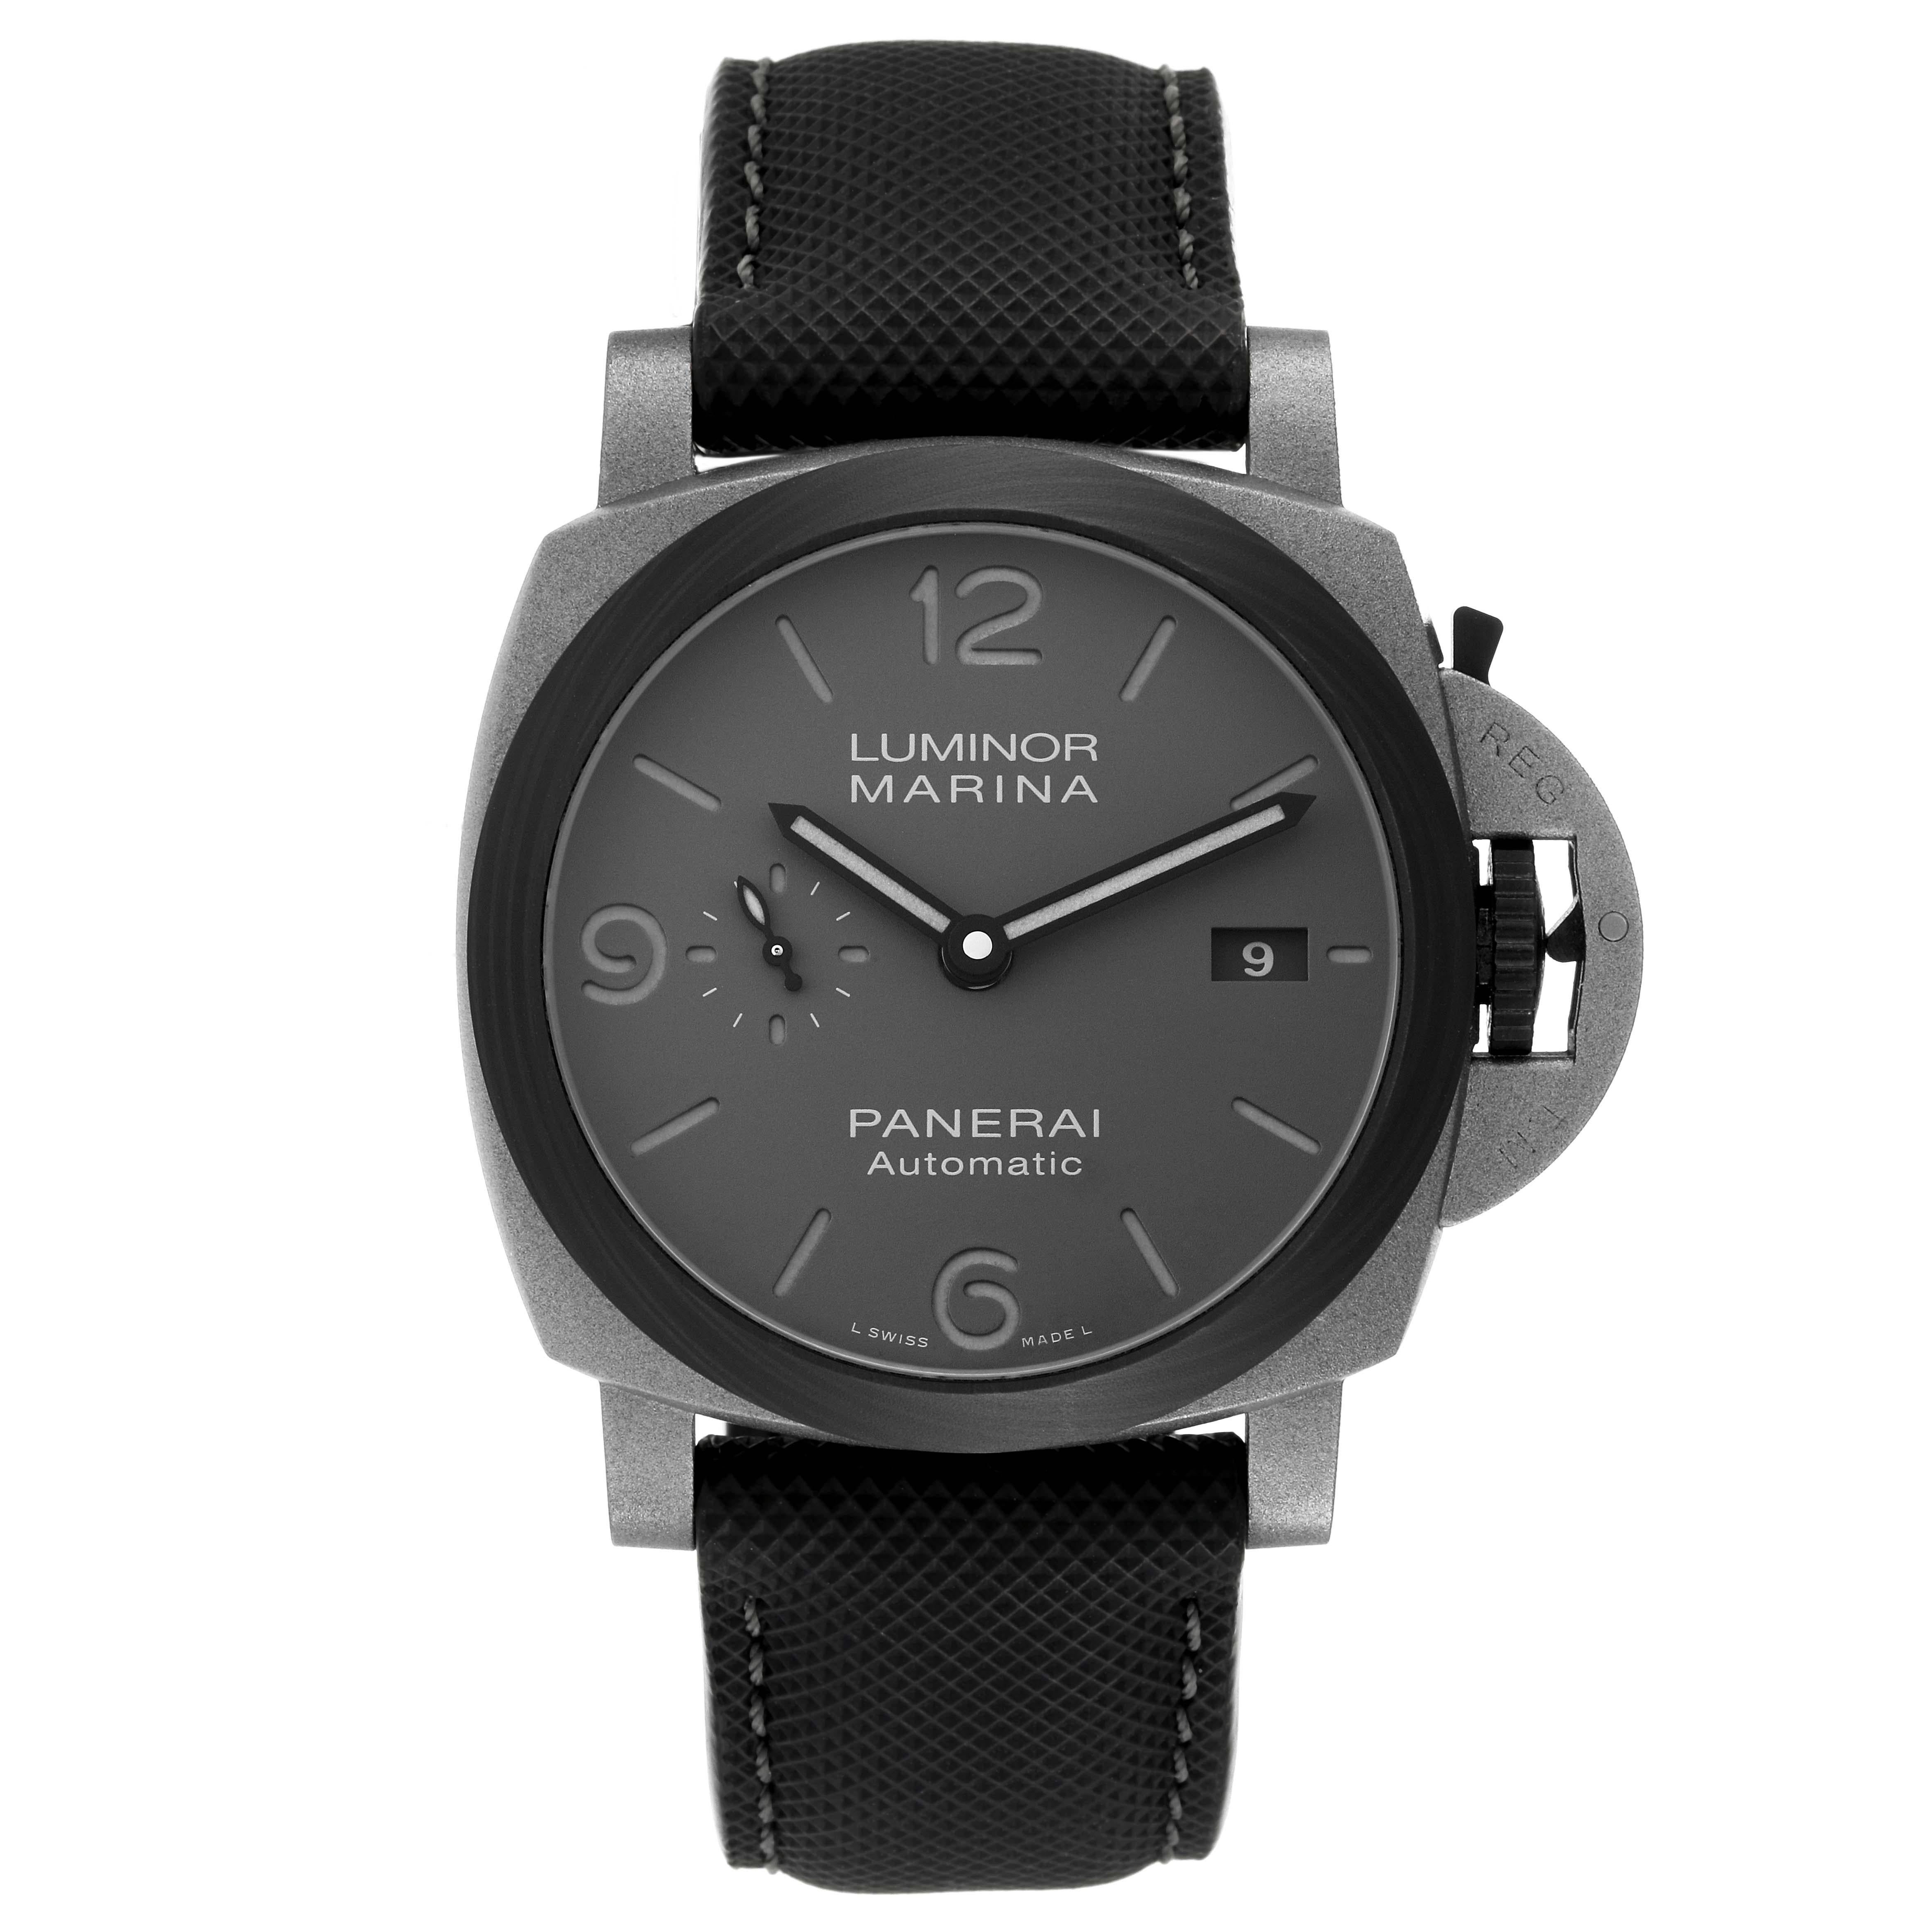 Panerai Luminor Marina TuttoGrigio Grey Dial Titanium Mens Watch PAM01662. Automatic self-winding movement. Two part cushion shaped DMLS titanium case 44.0 mm in diameter. Carbotech sloped bezel. Scratch resistant sapphire crystal. Grey dial with